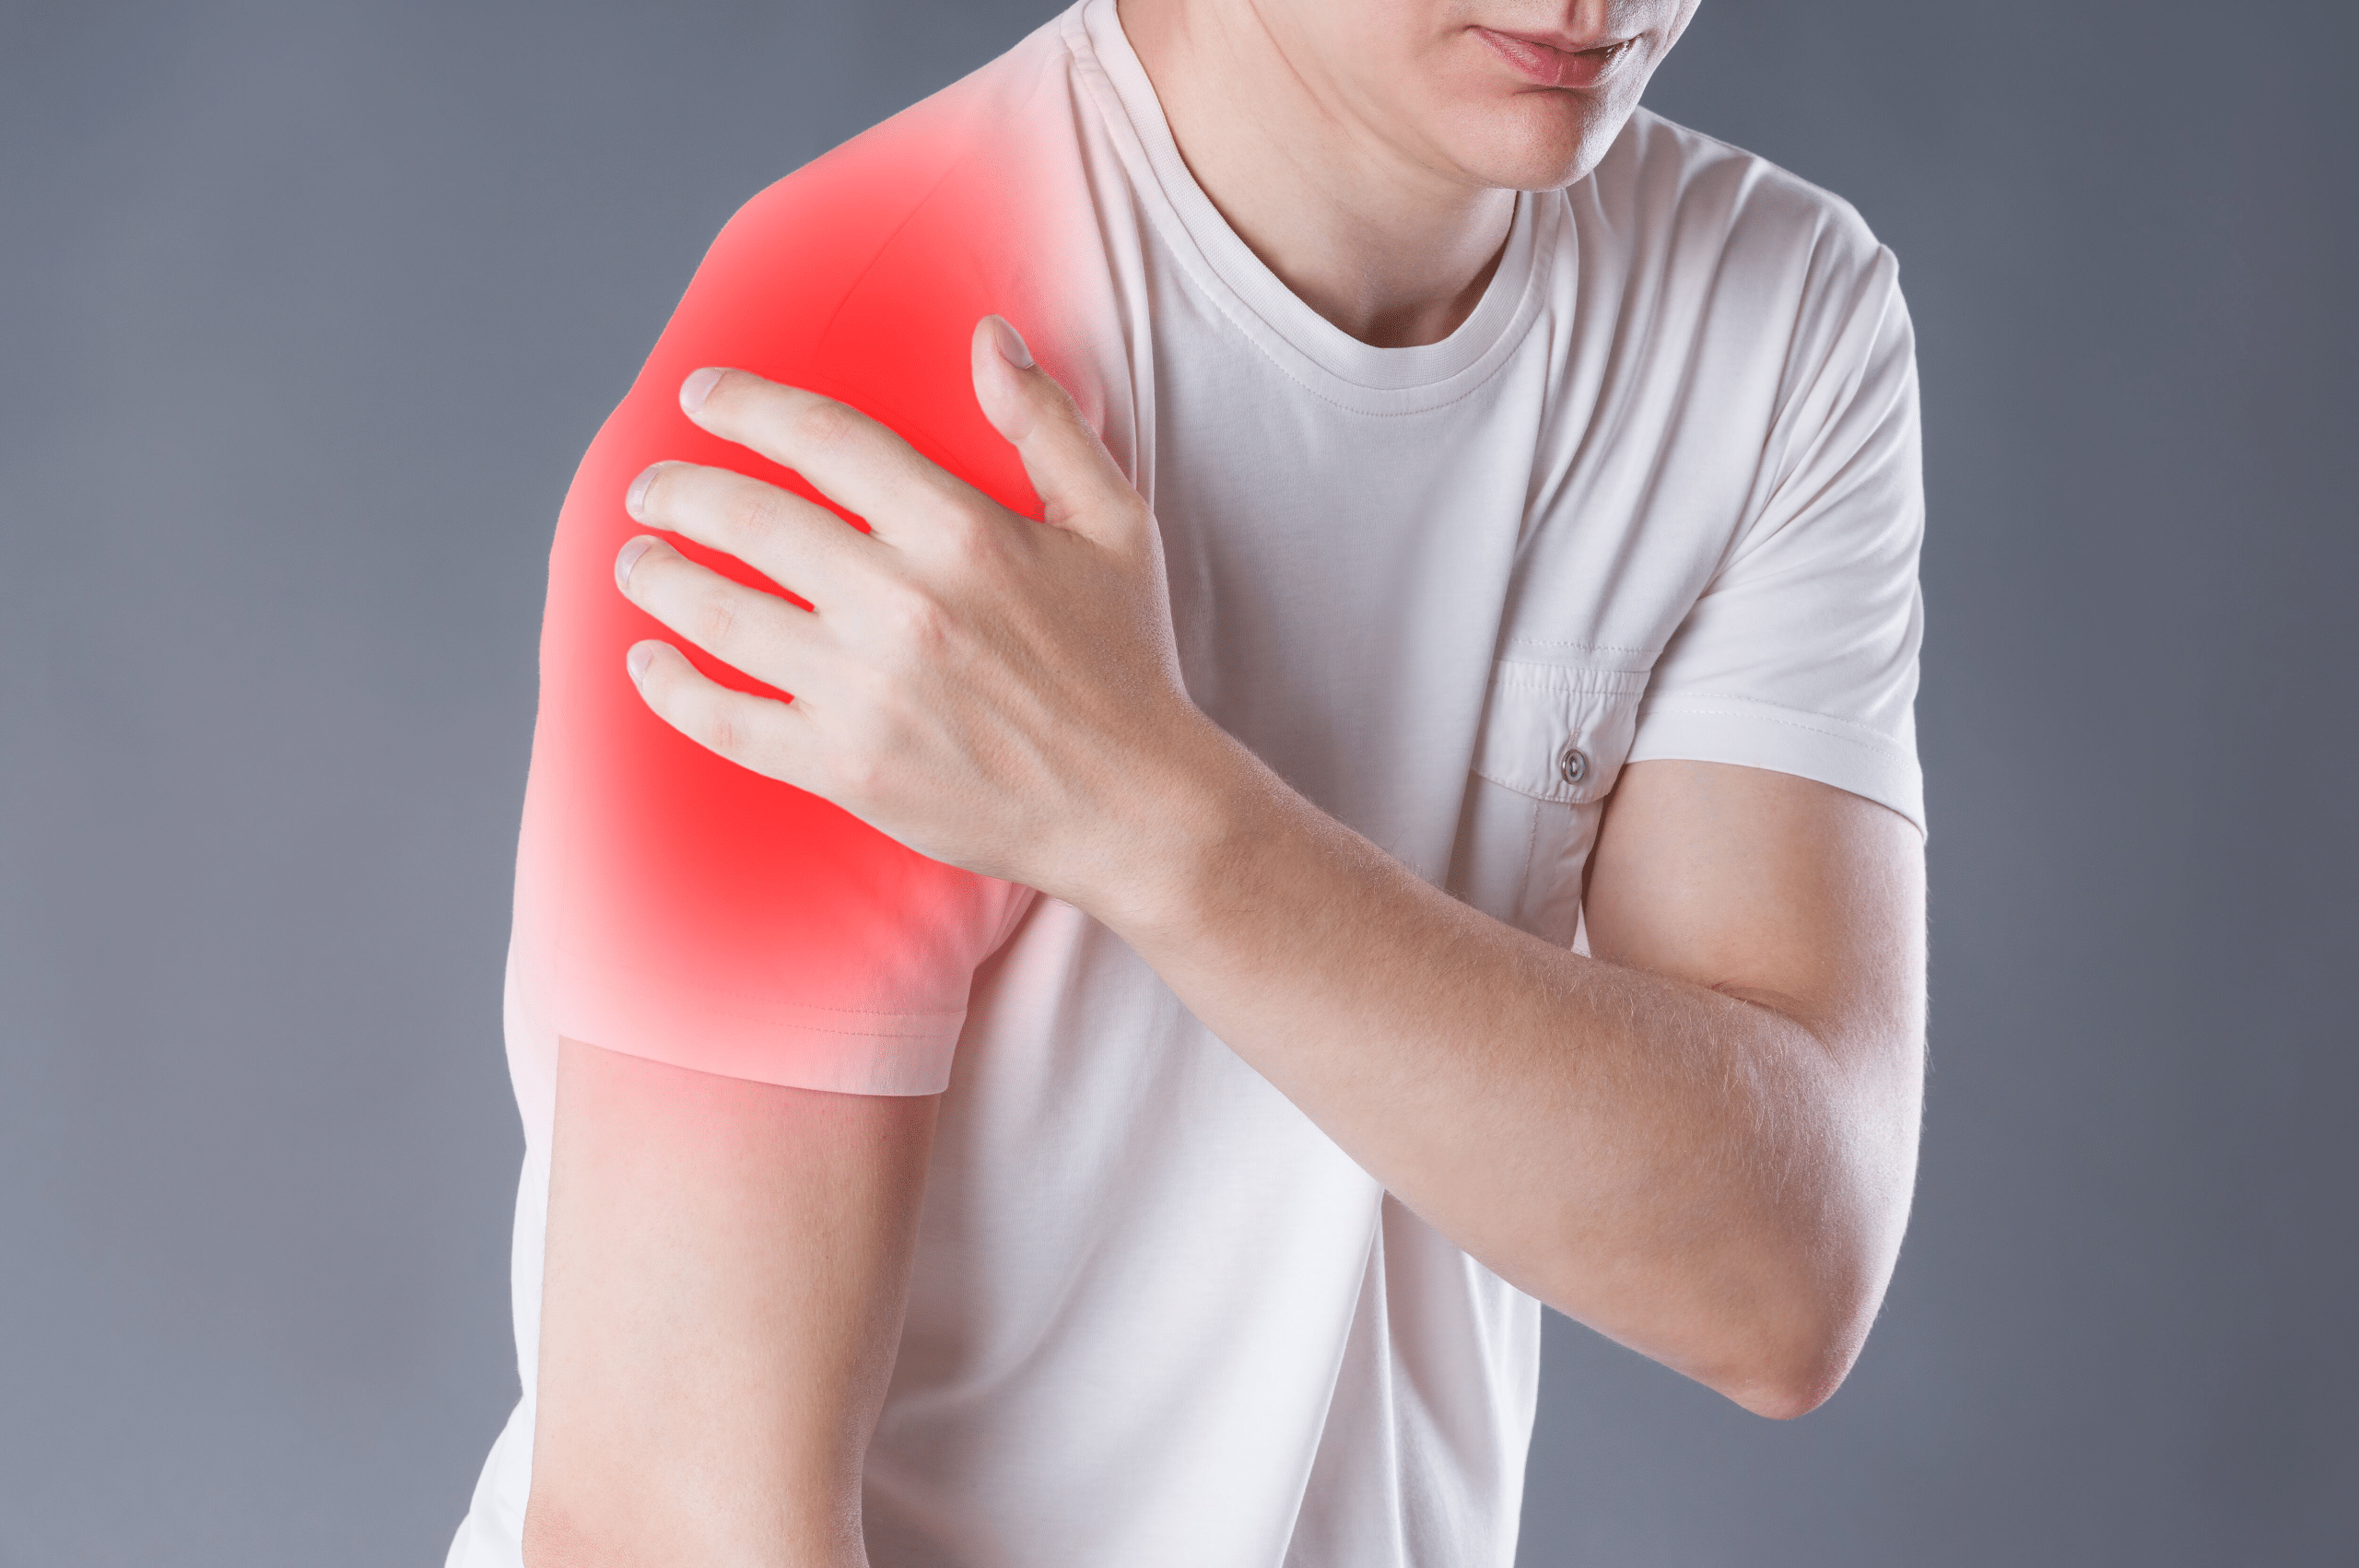 How Can I Prevent a Shoulder Injury